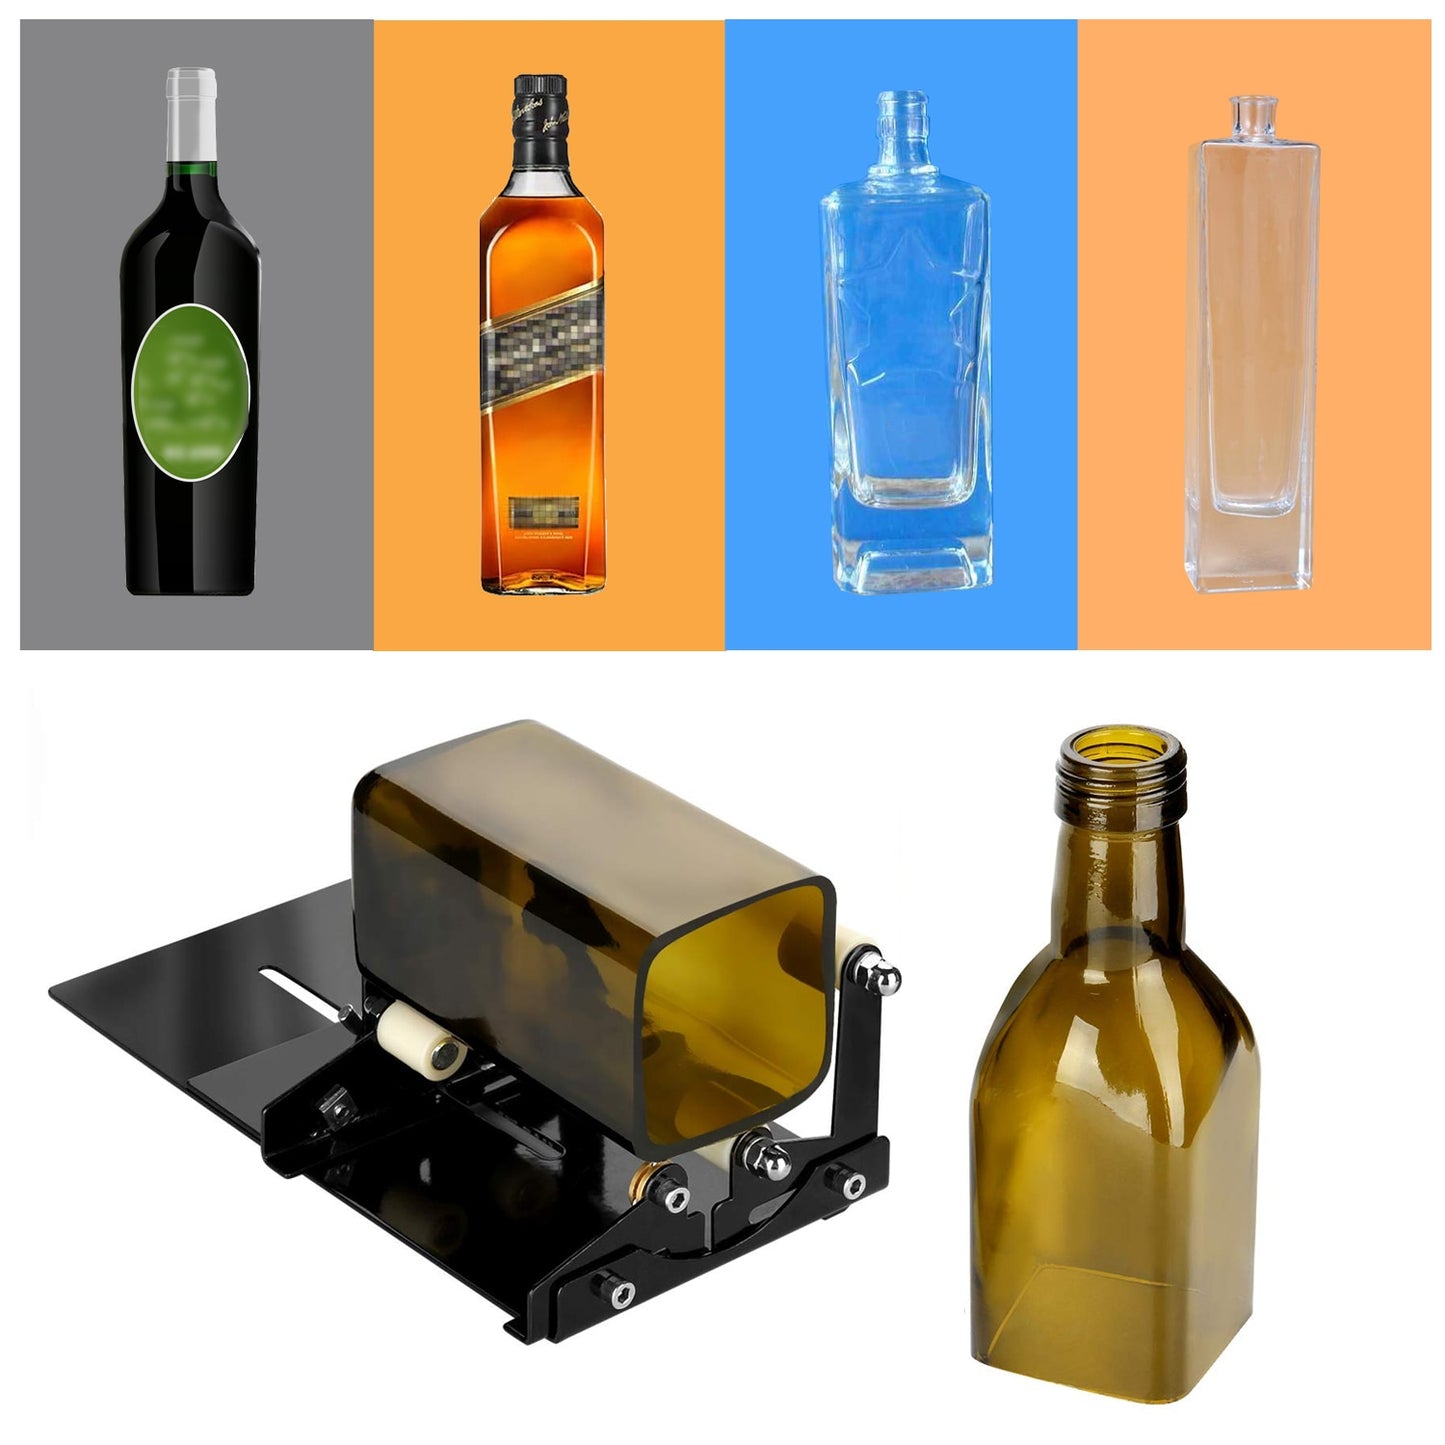 Diy Glass Bottle Cutter Adjustable Sizes Metal Glassbottle Cut Machine For  Crafting Wine Bottles House Decorations Cutting Tool